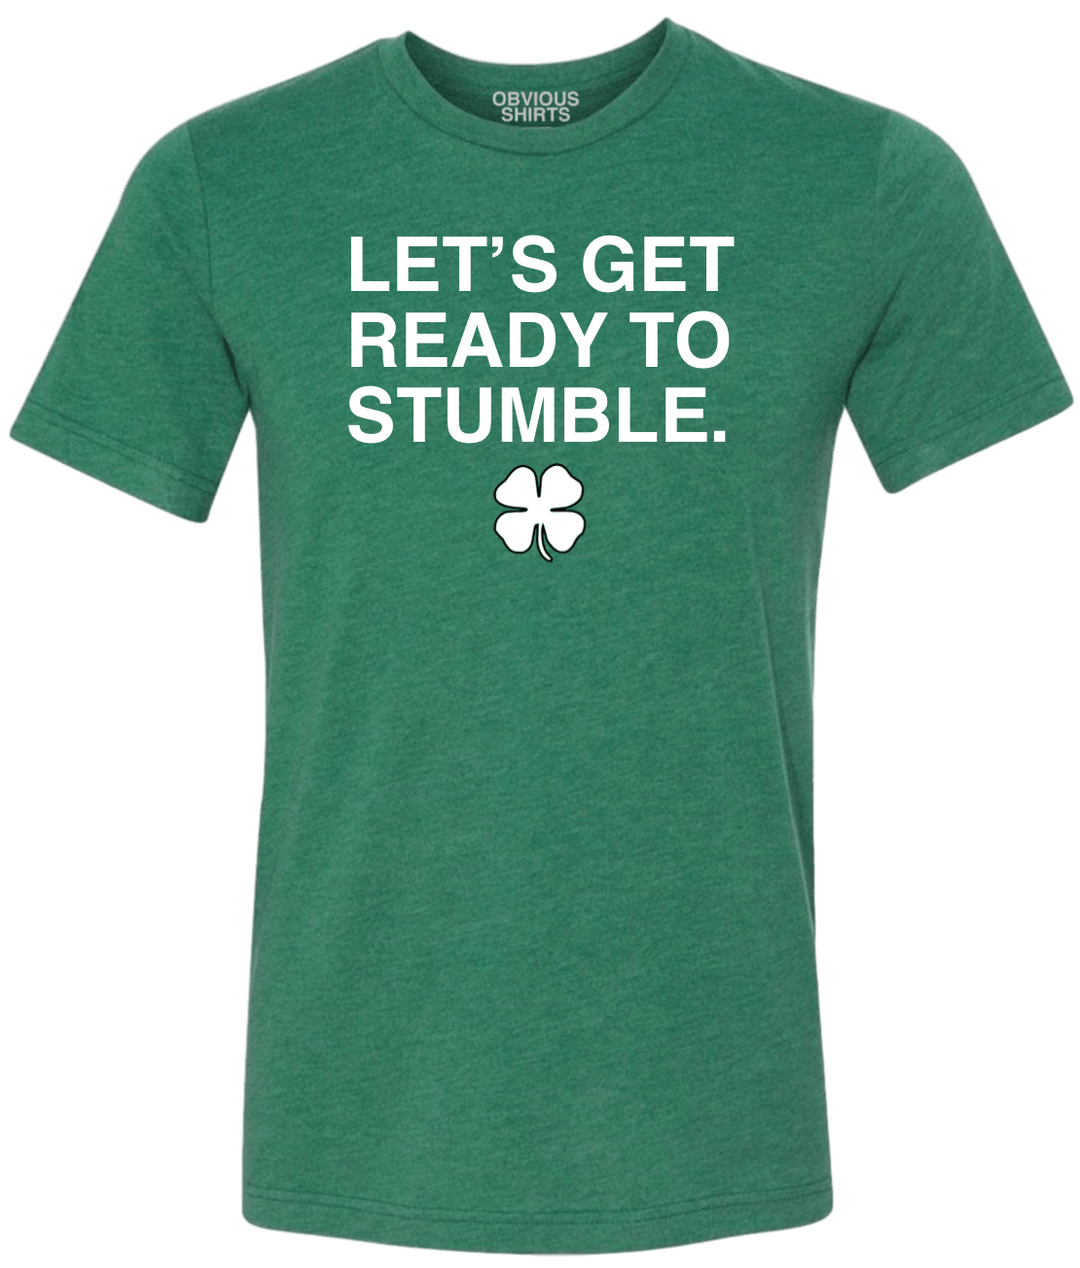 LET'S GET READY TO STUMBLE. - OBVIOUS SHIRTS